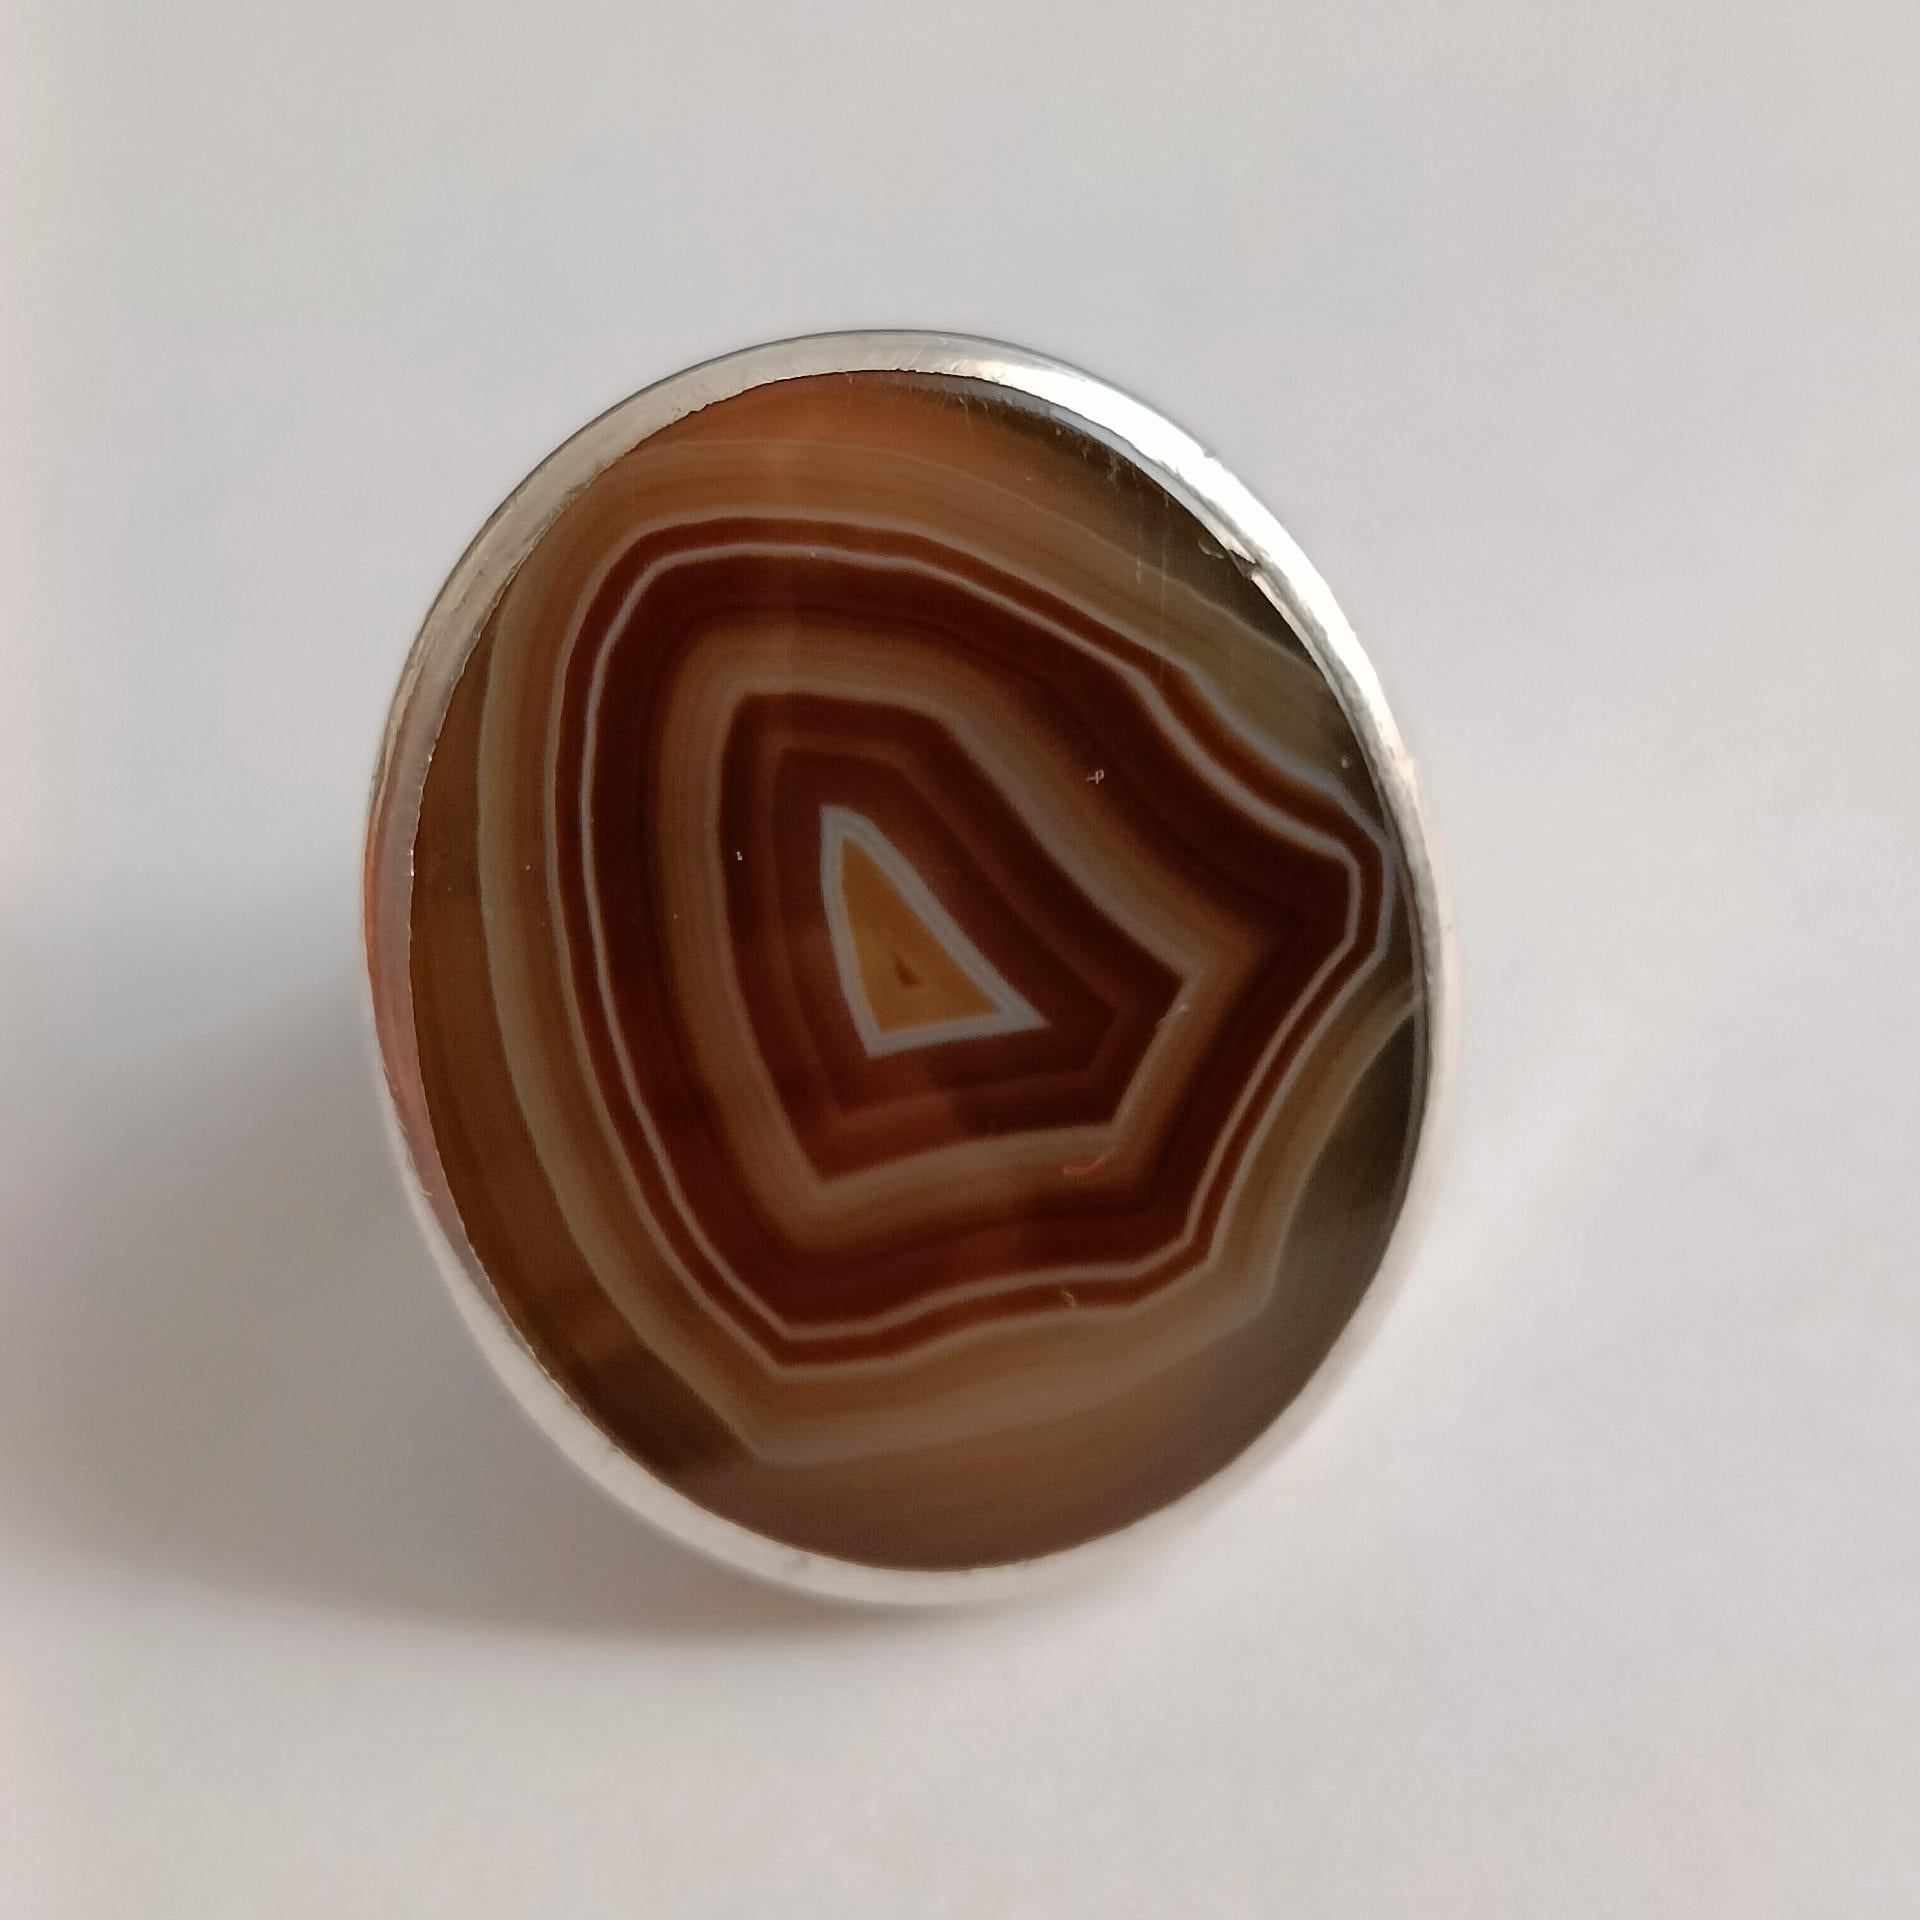 Important modernist Scandinavian silver ring with flat-cut agate stone by Wiwen Nilsson. Lund, Sweden, 1949. Rare collector's piece.

Hallmarks:
AN (Wiwen Nilsson continued to use the registered 